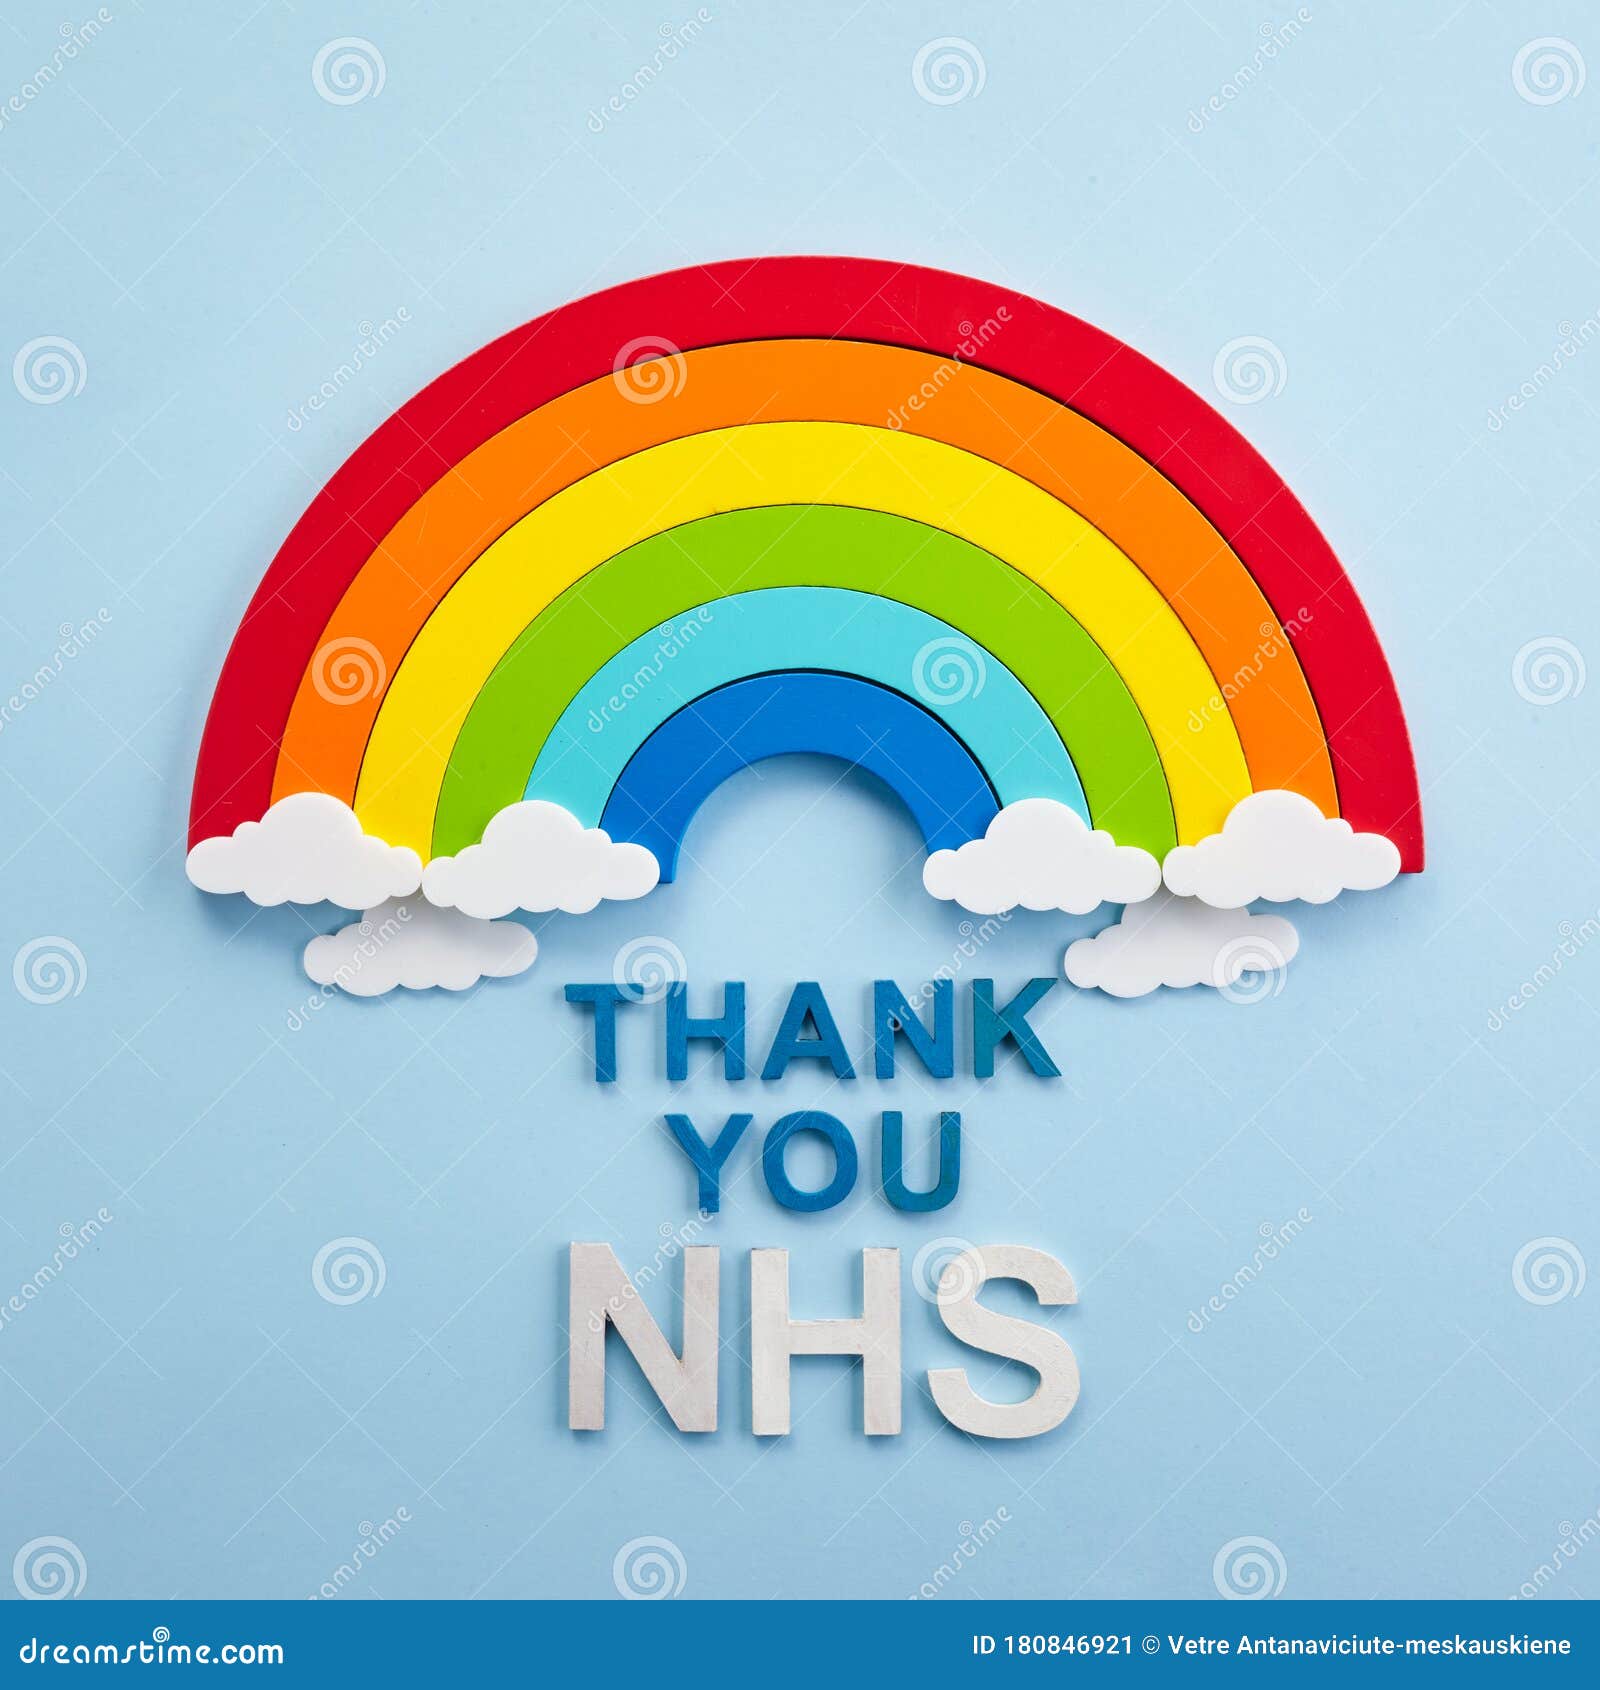 thank you nhs rainbow banner. rainbow ob blue background with letters